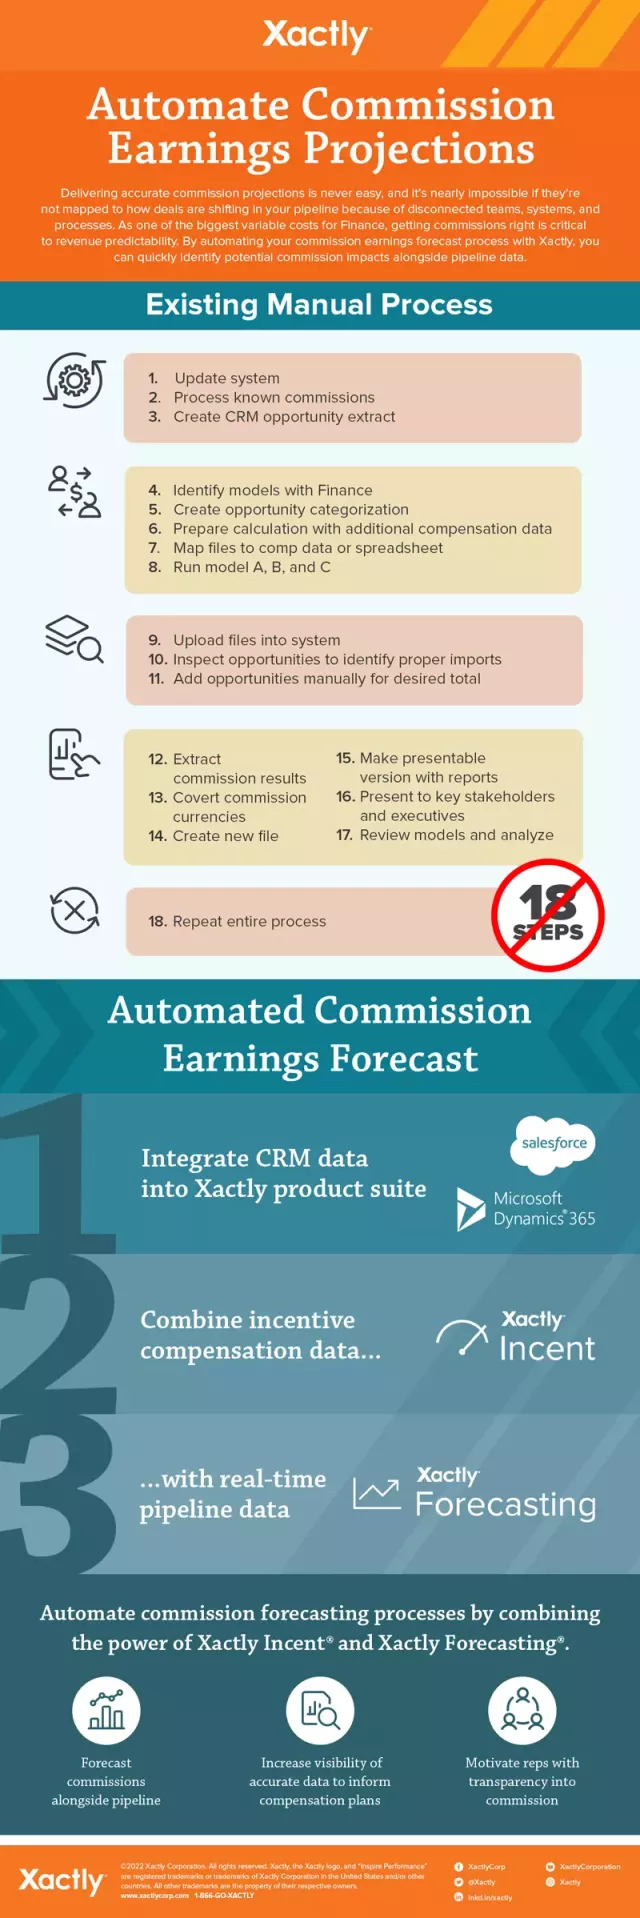 Automate commission earnings projections infographic